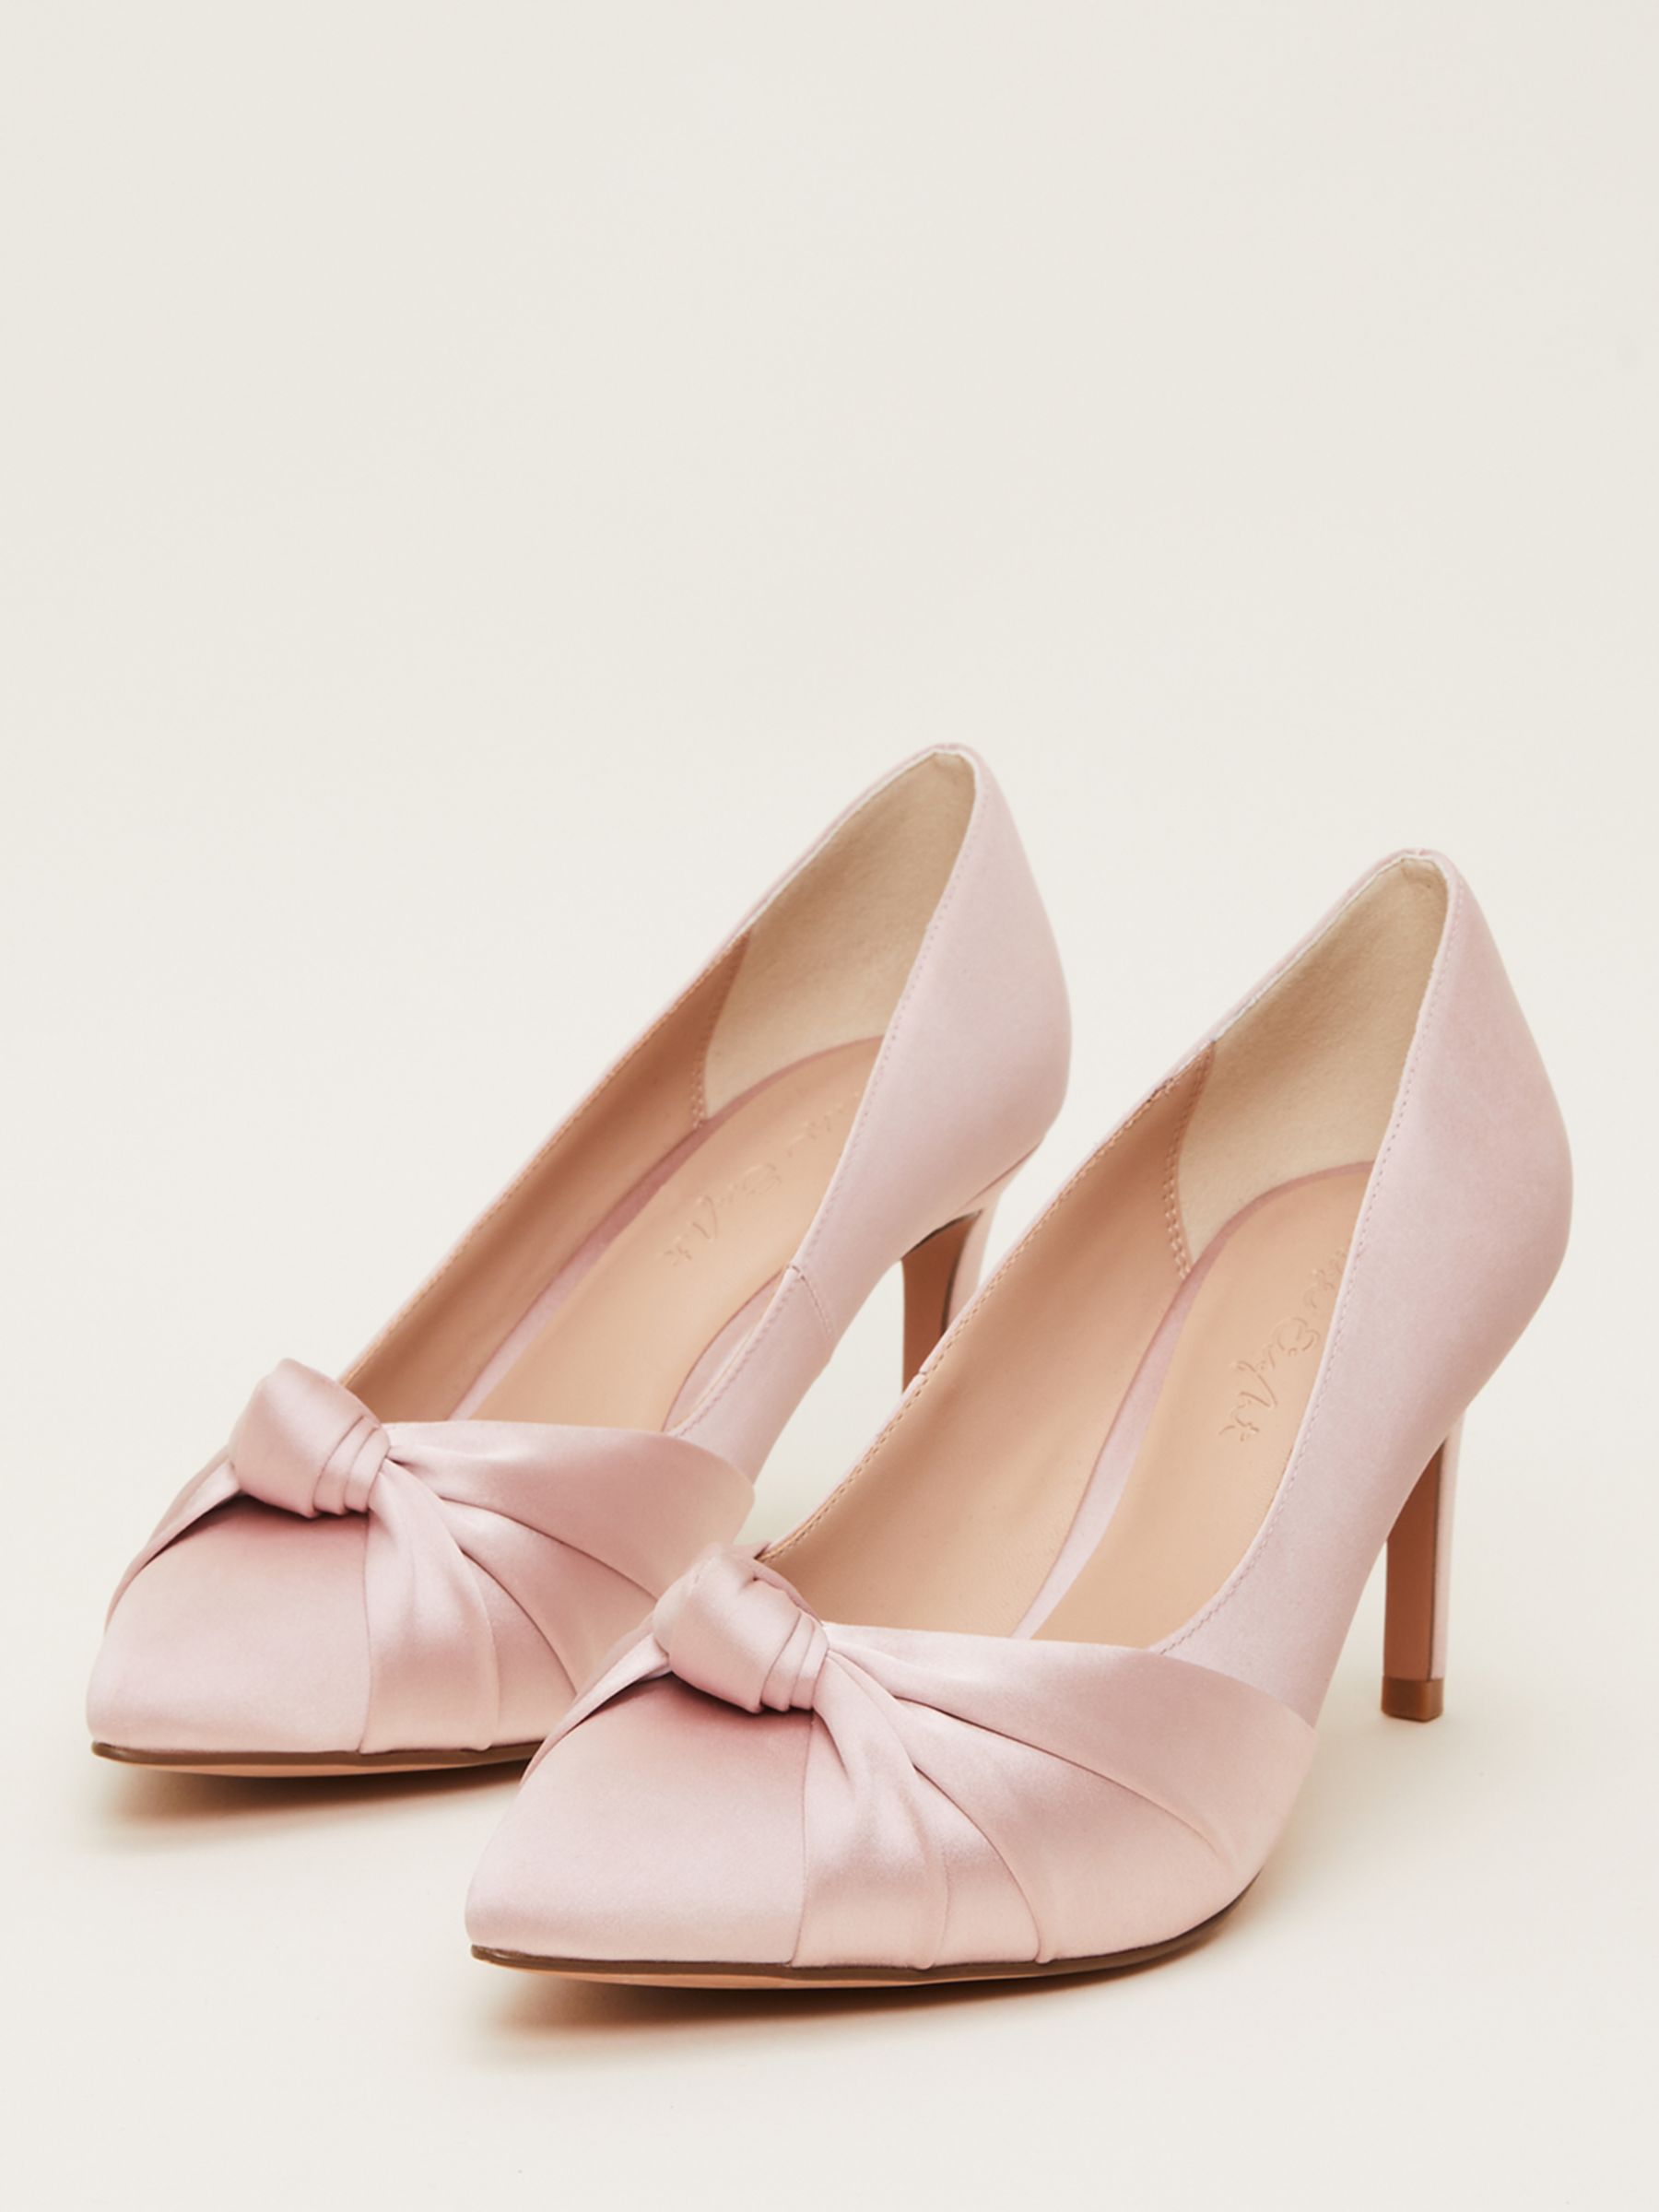 Buy Phase Eight Satin Knot Front Court Shoes Online at johnlewis.com